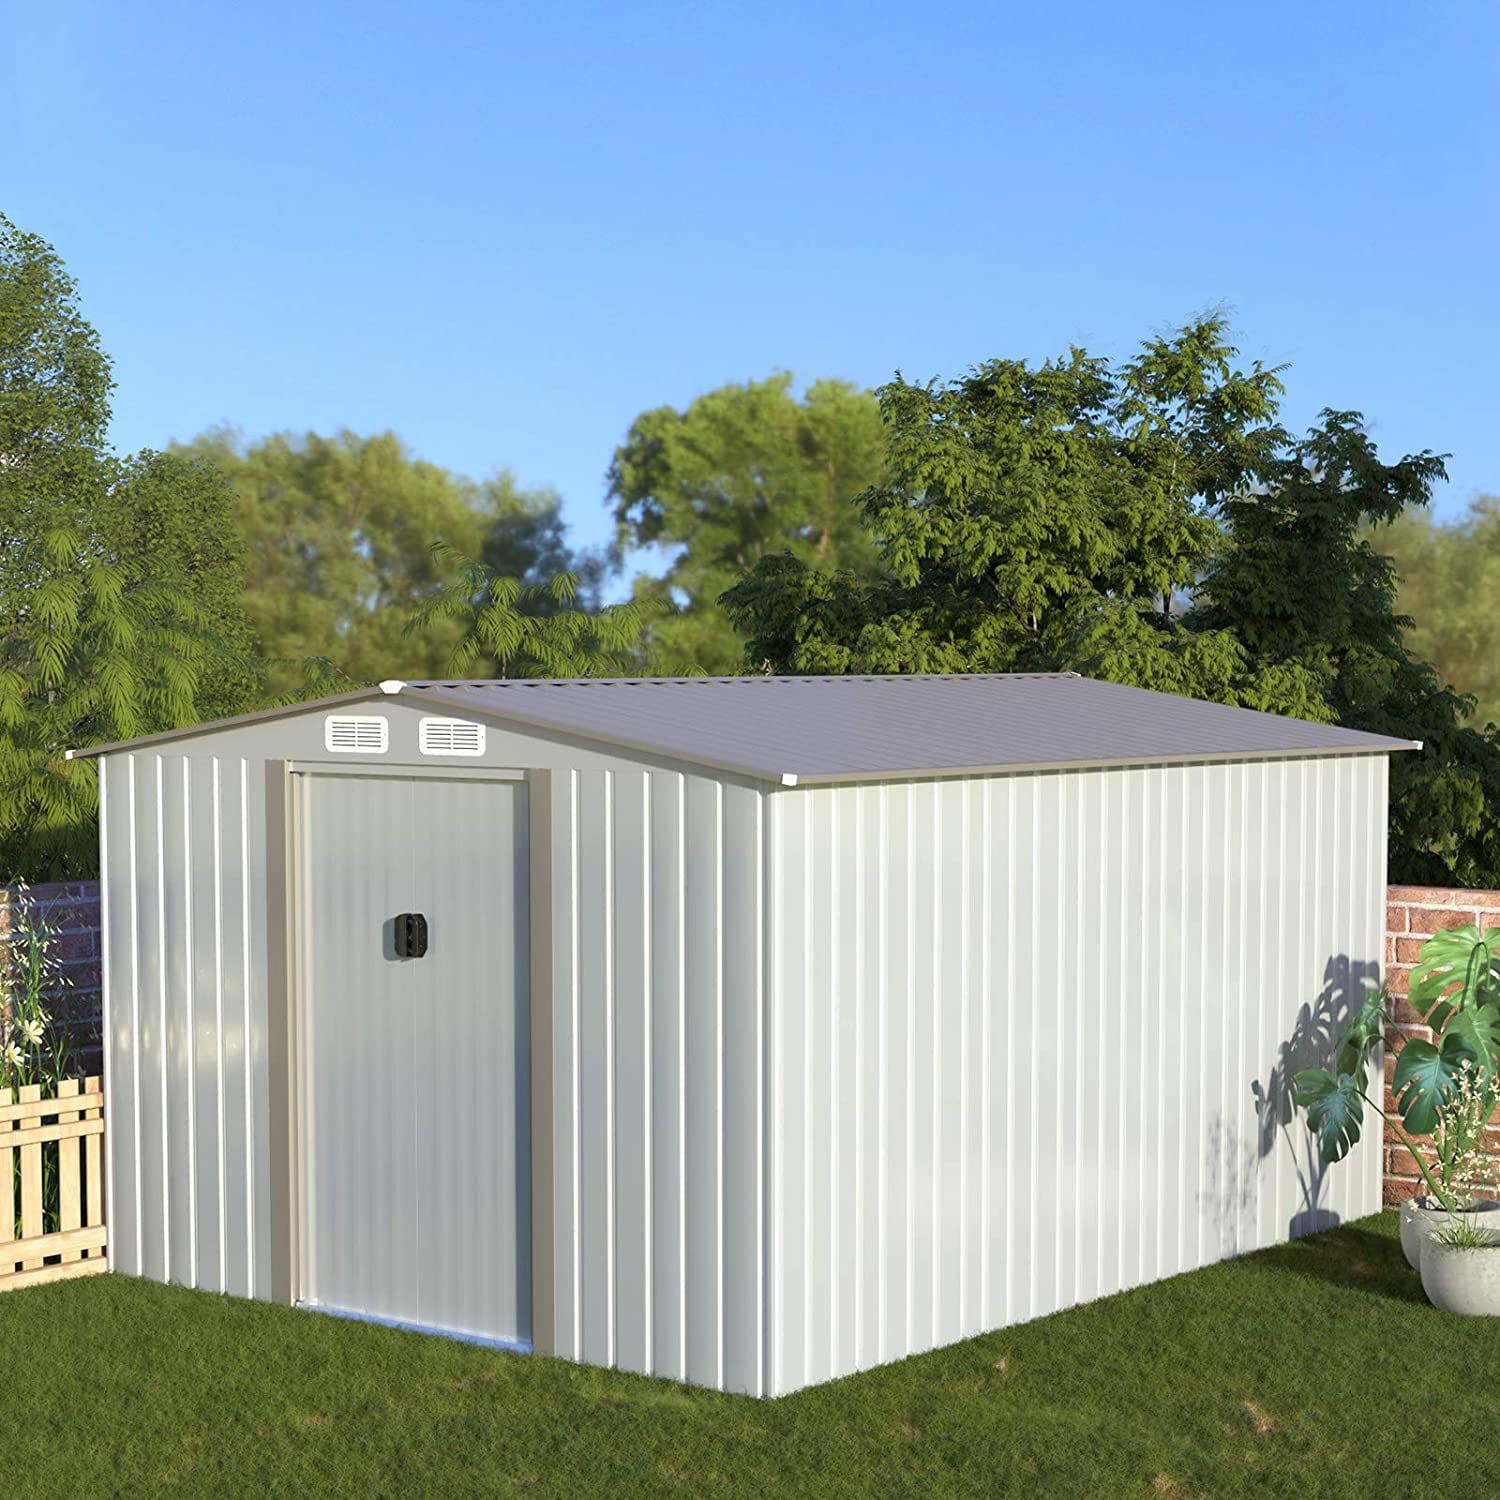 Patio Aoxun 6' x 8' Outdoor Metal Storage Shed with Sliding Door Tool Storage Shed for Backyard with Floor Frame Lawn 